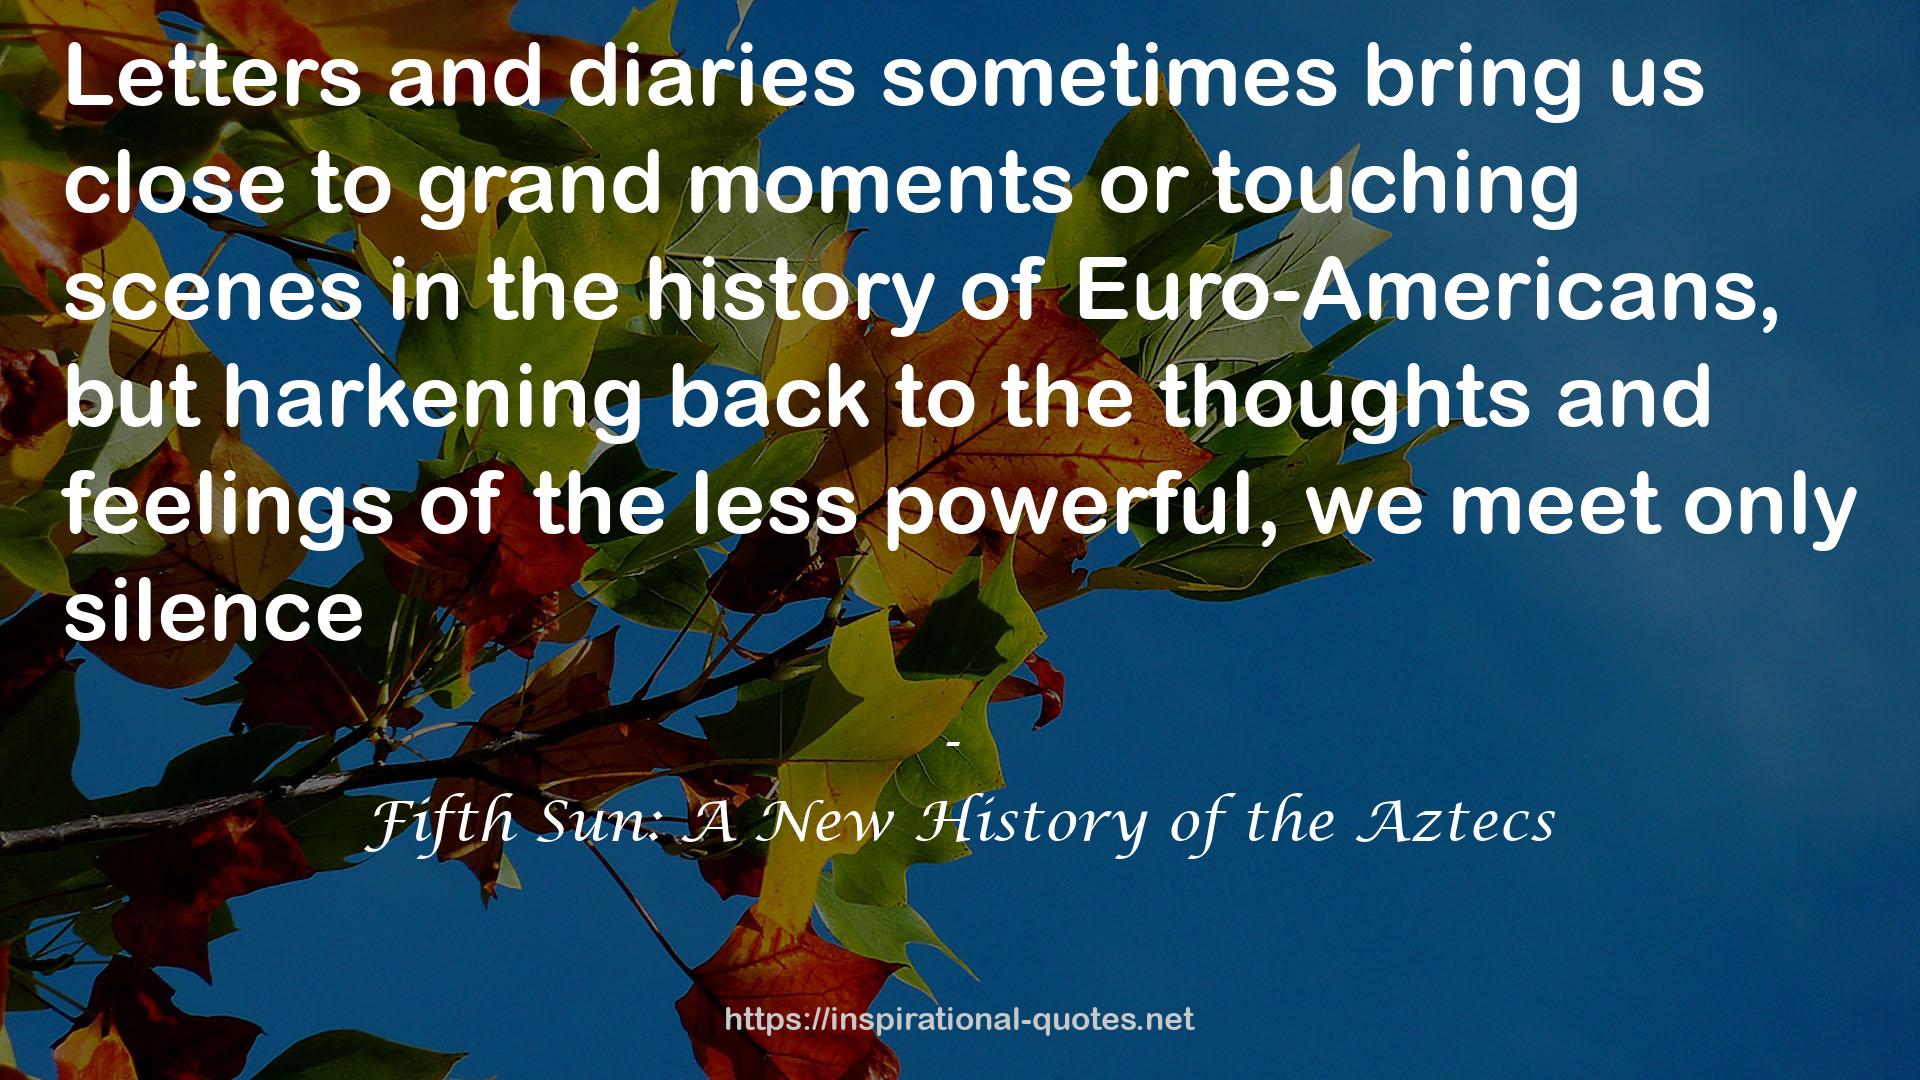 Fifth Sun: A New History of the Aztecs QUOTES